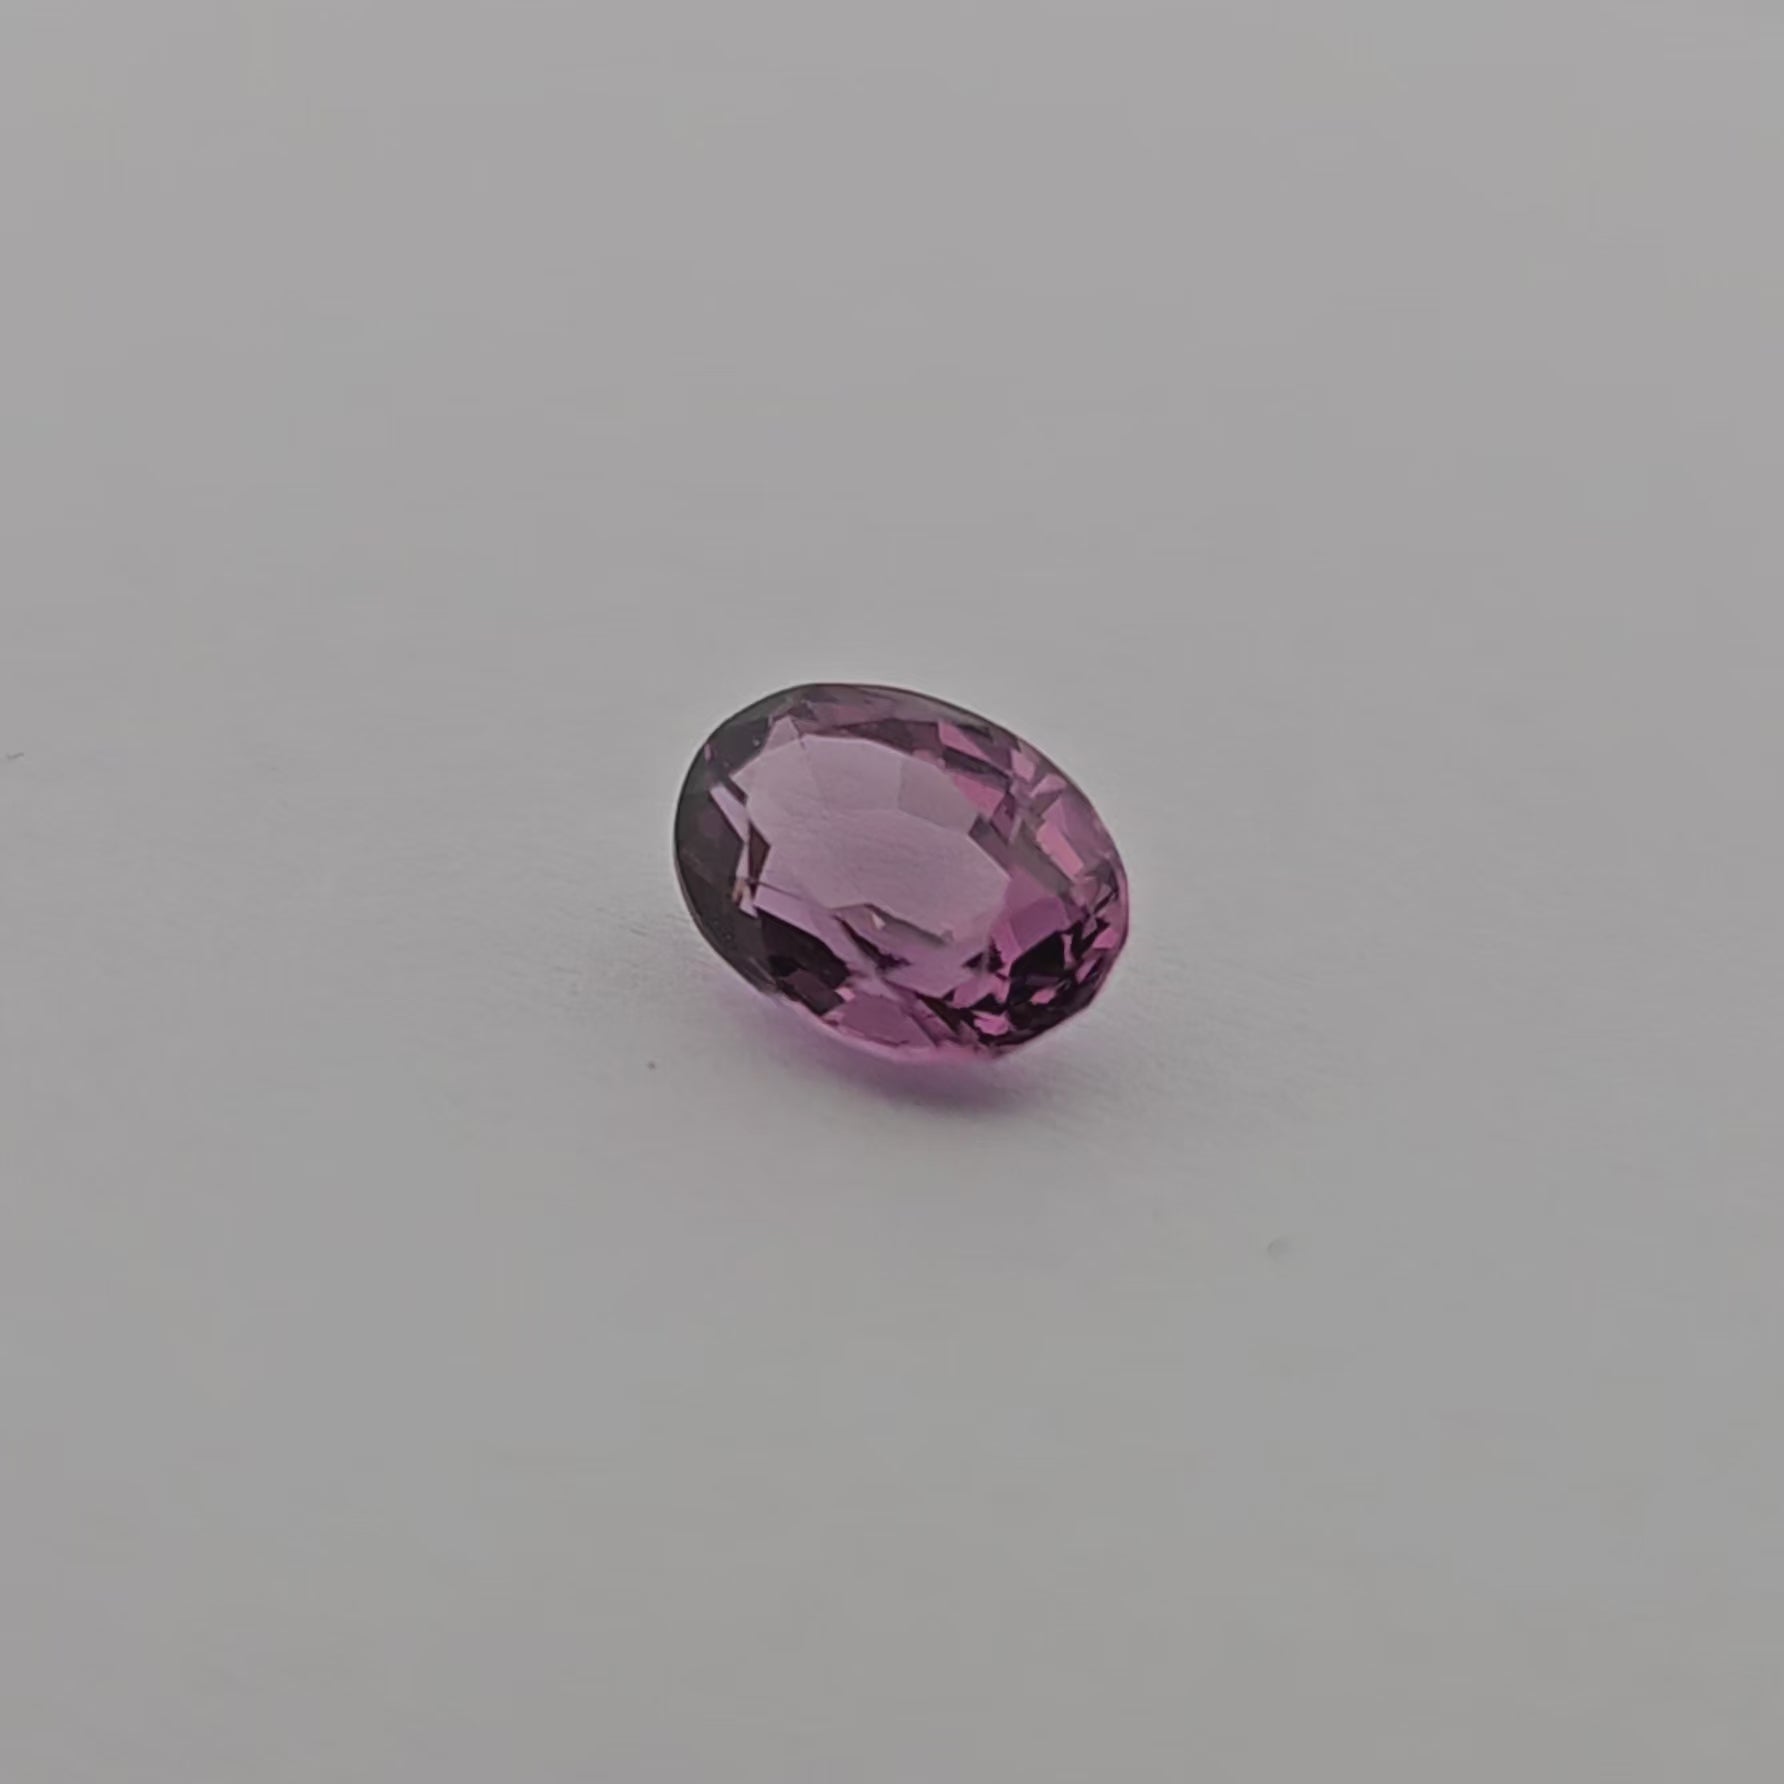 for sale Natural Multi Spinel Stone 1.40 Carats Oval Cut (7.8 x 5.6 mm)